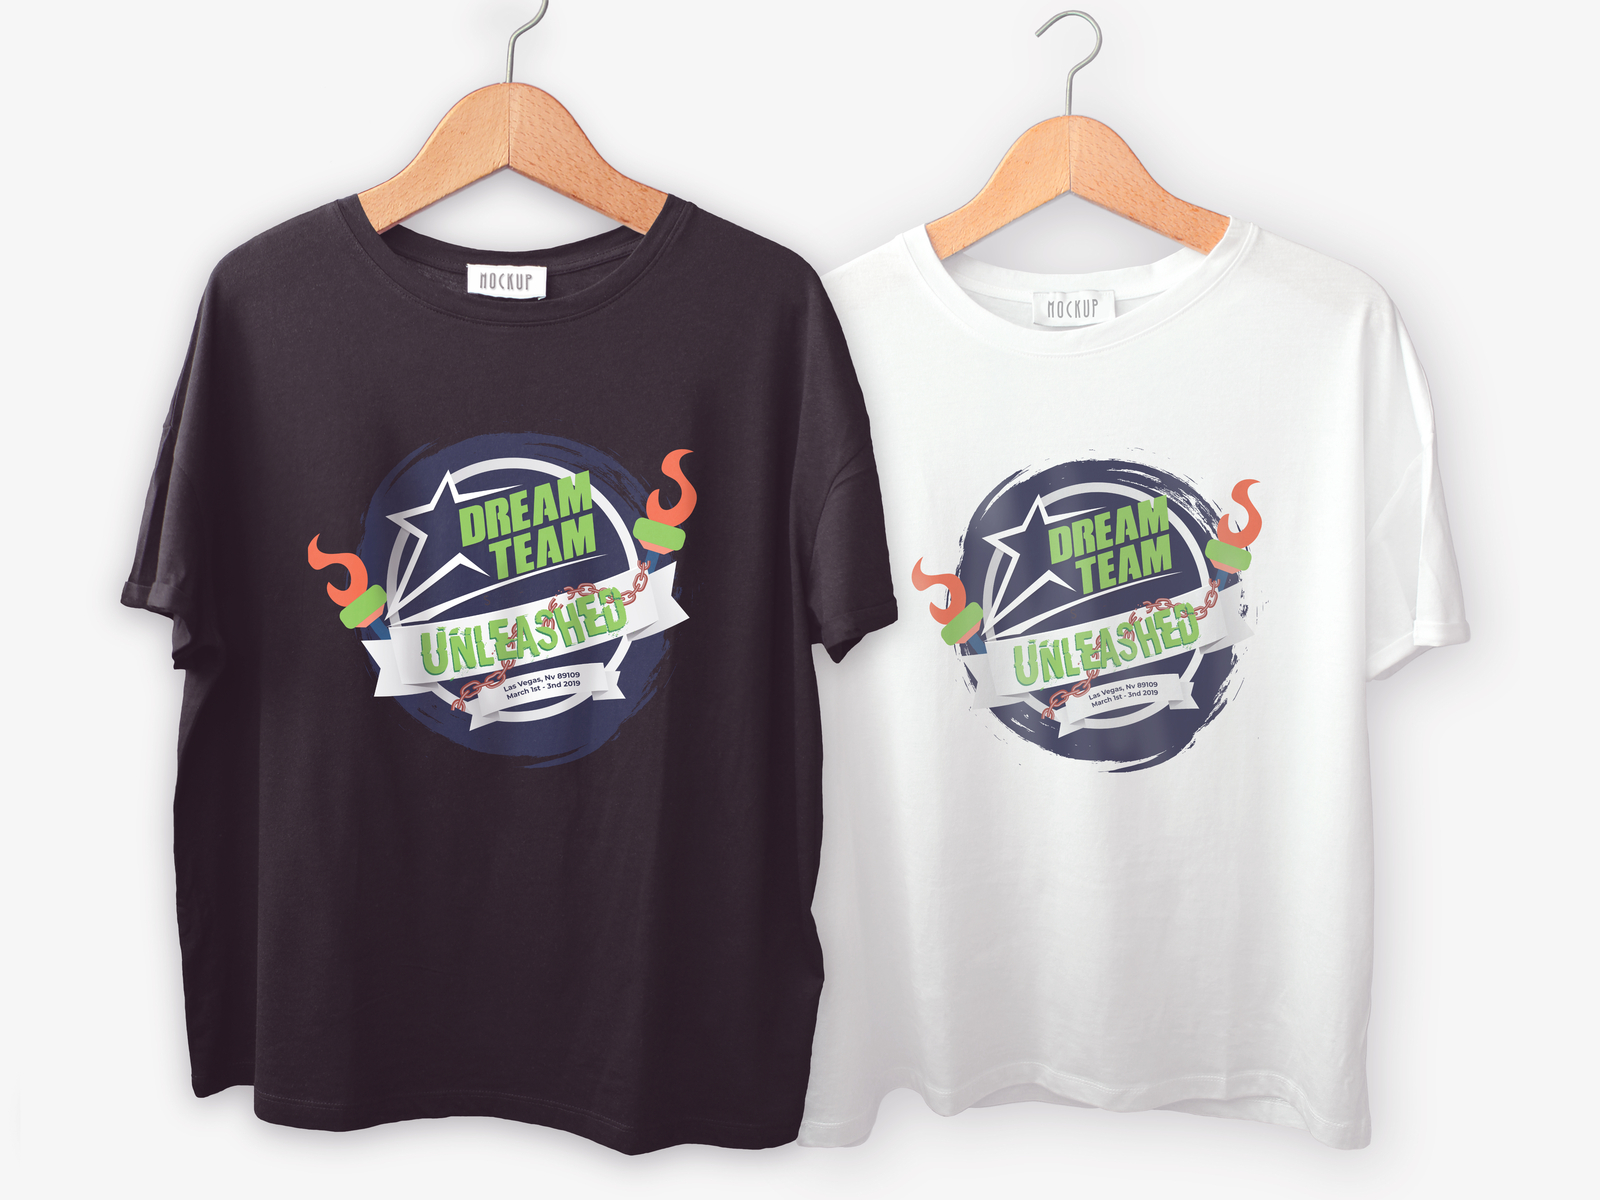 event t-shirt concept art by Pranay Patel on Dribbble